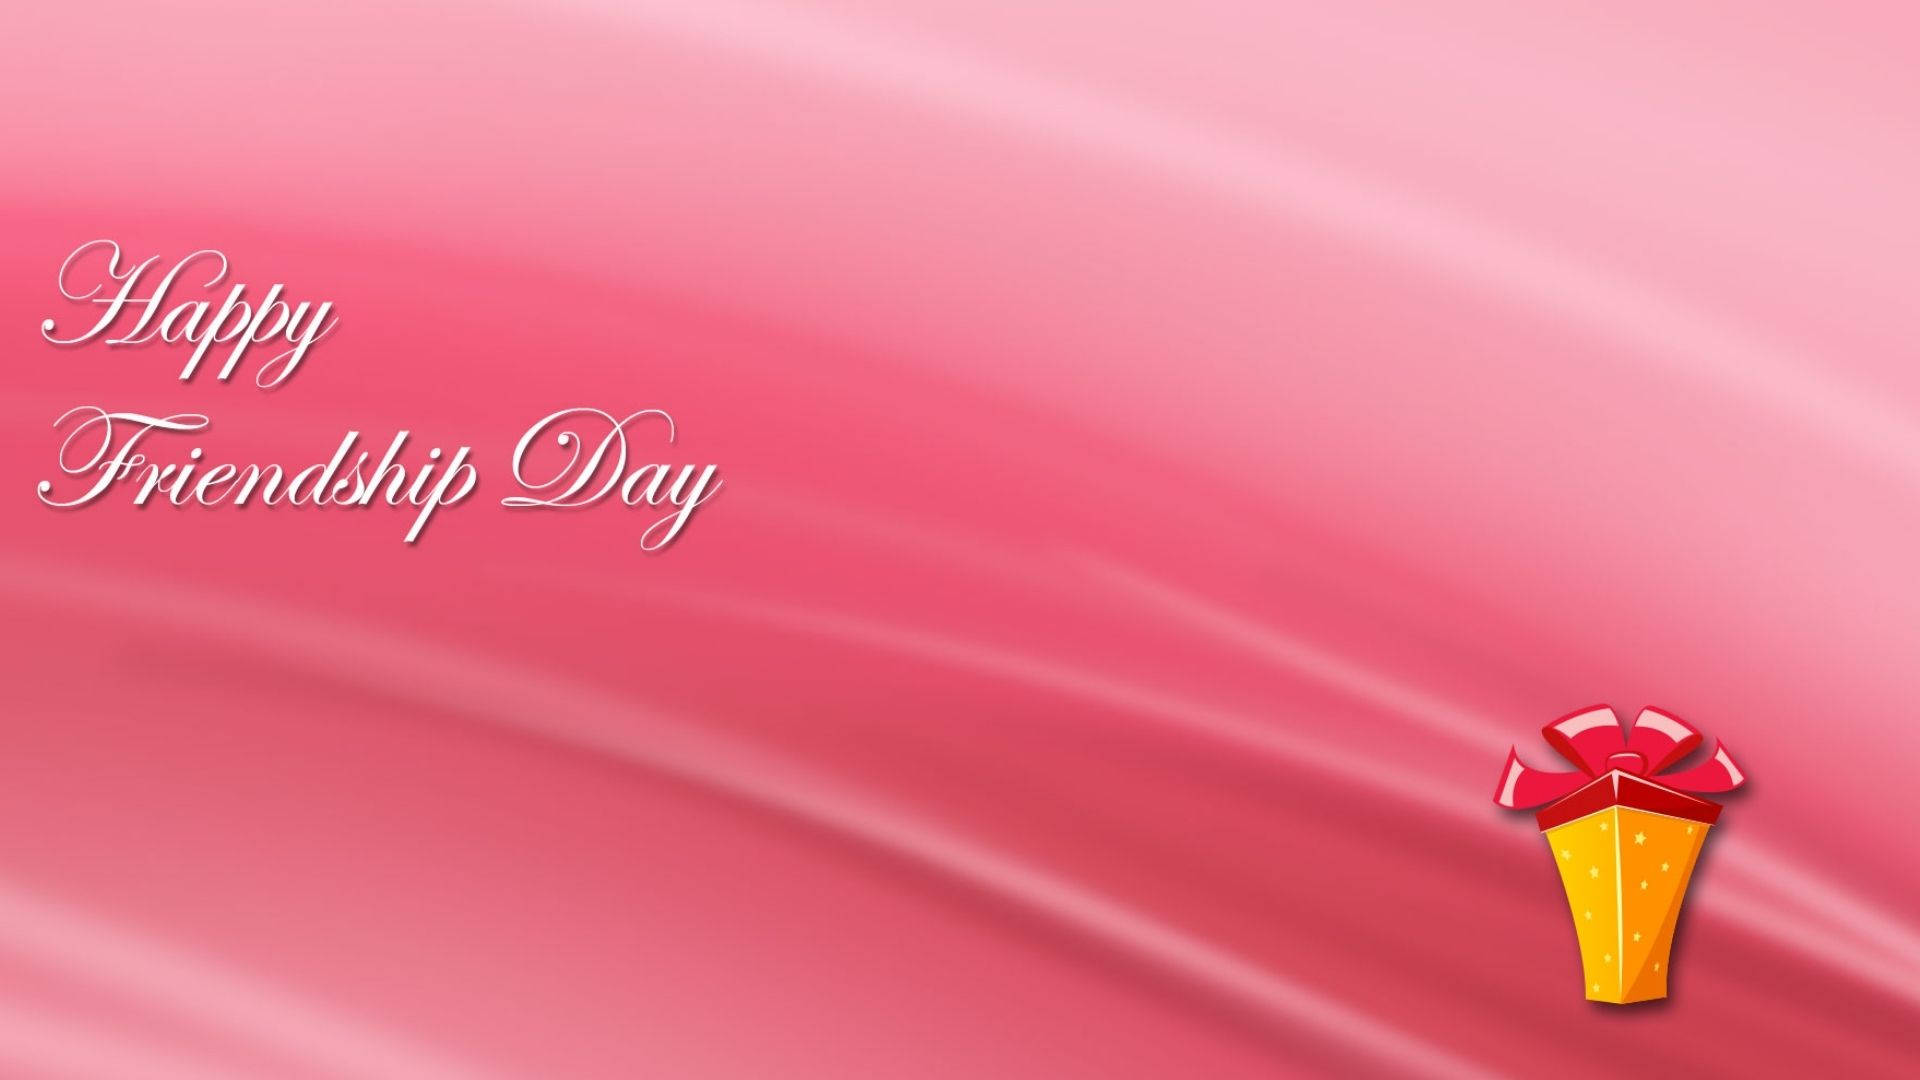 Friendship Day With A Gift Background